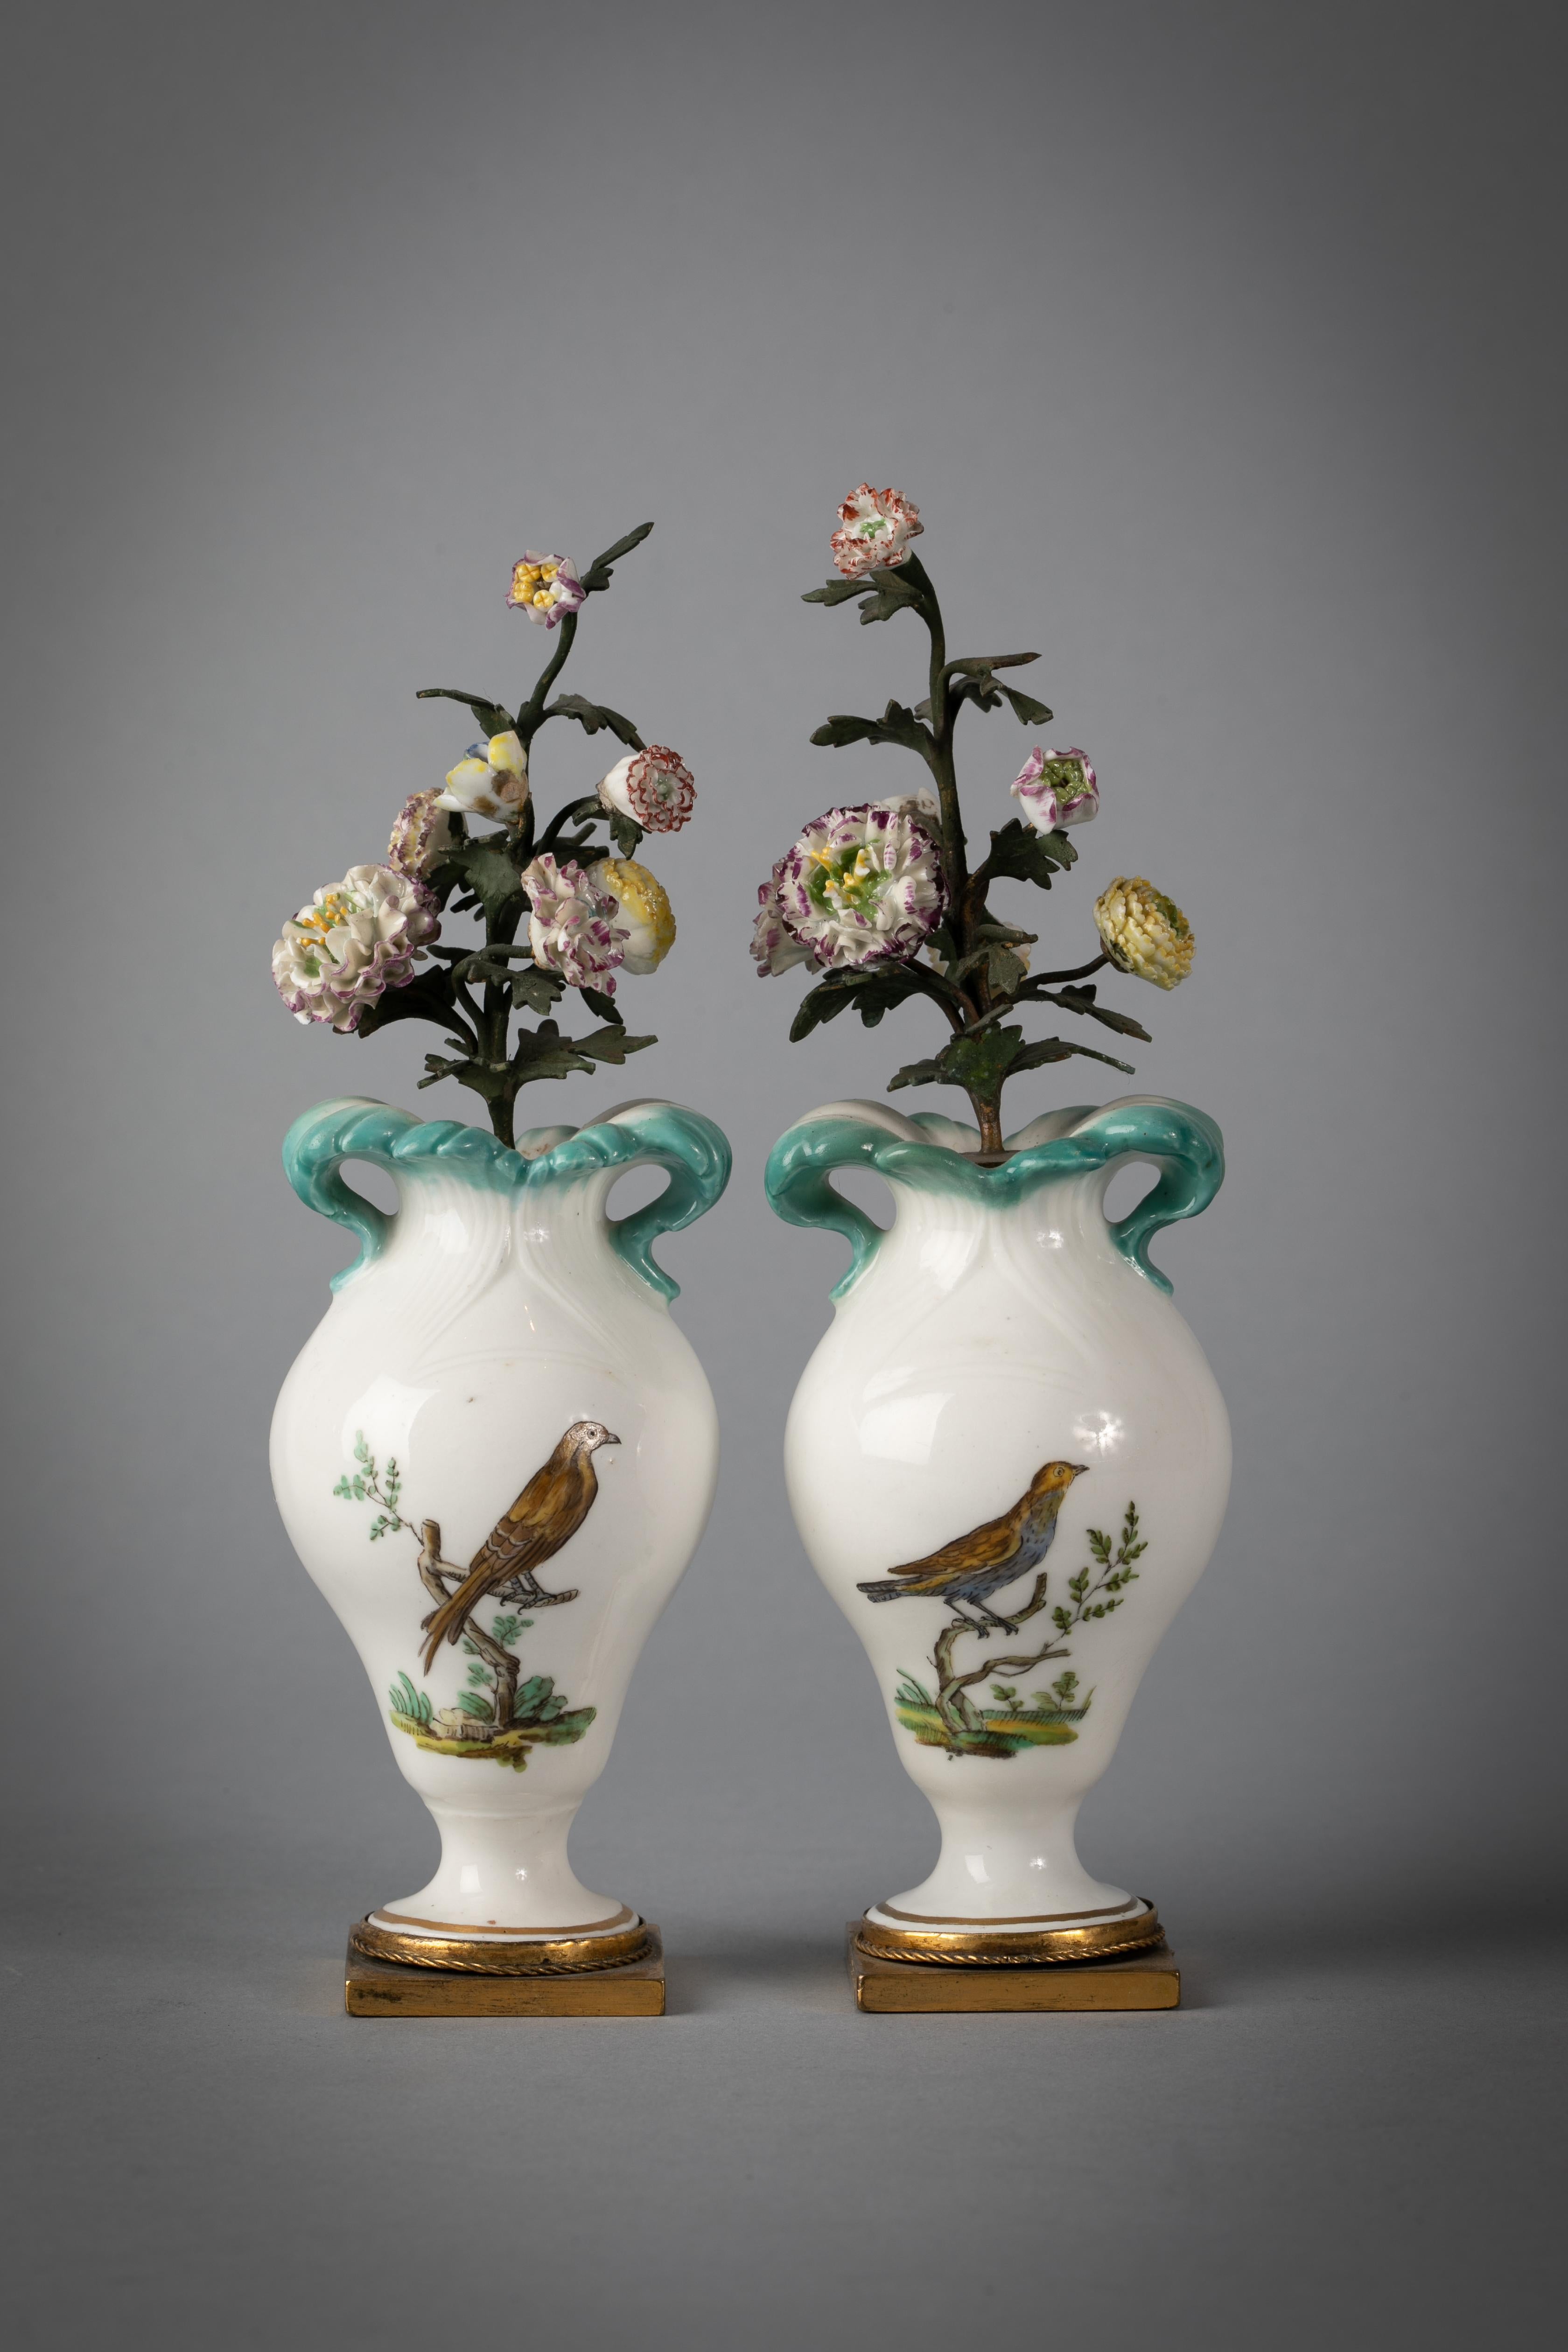 With floral inserts on gilt bronze base. In Sevres-style painted on either side with birds perched on branches.